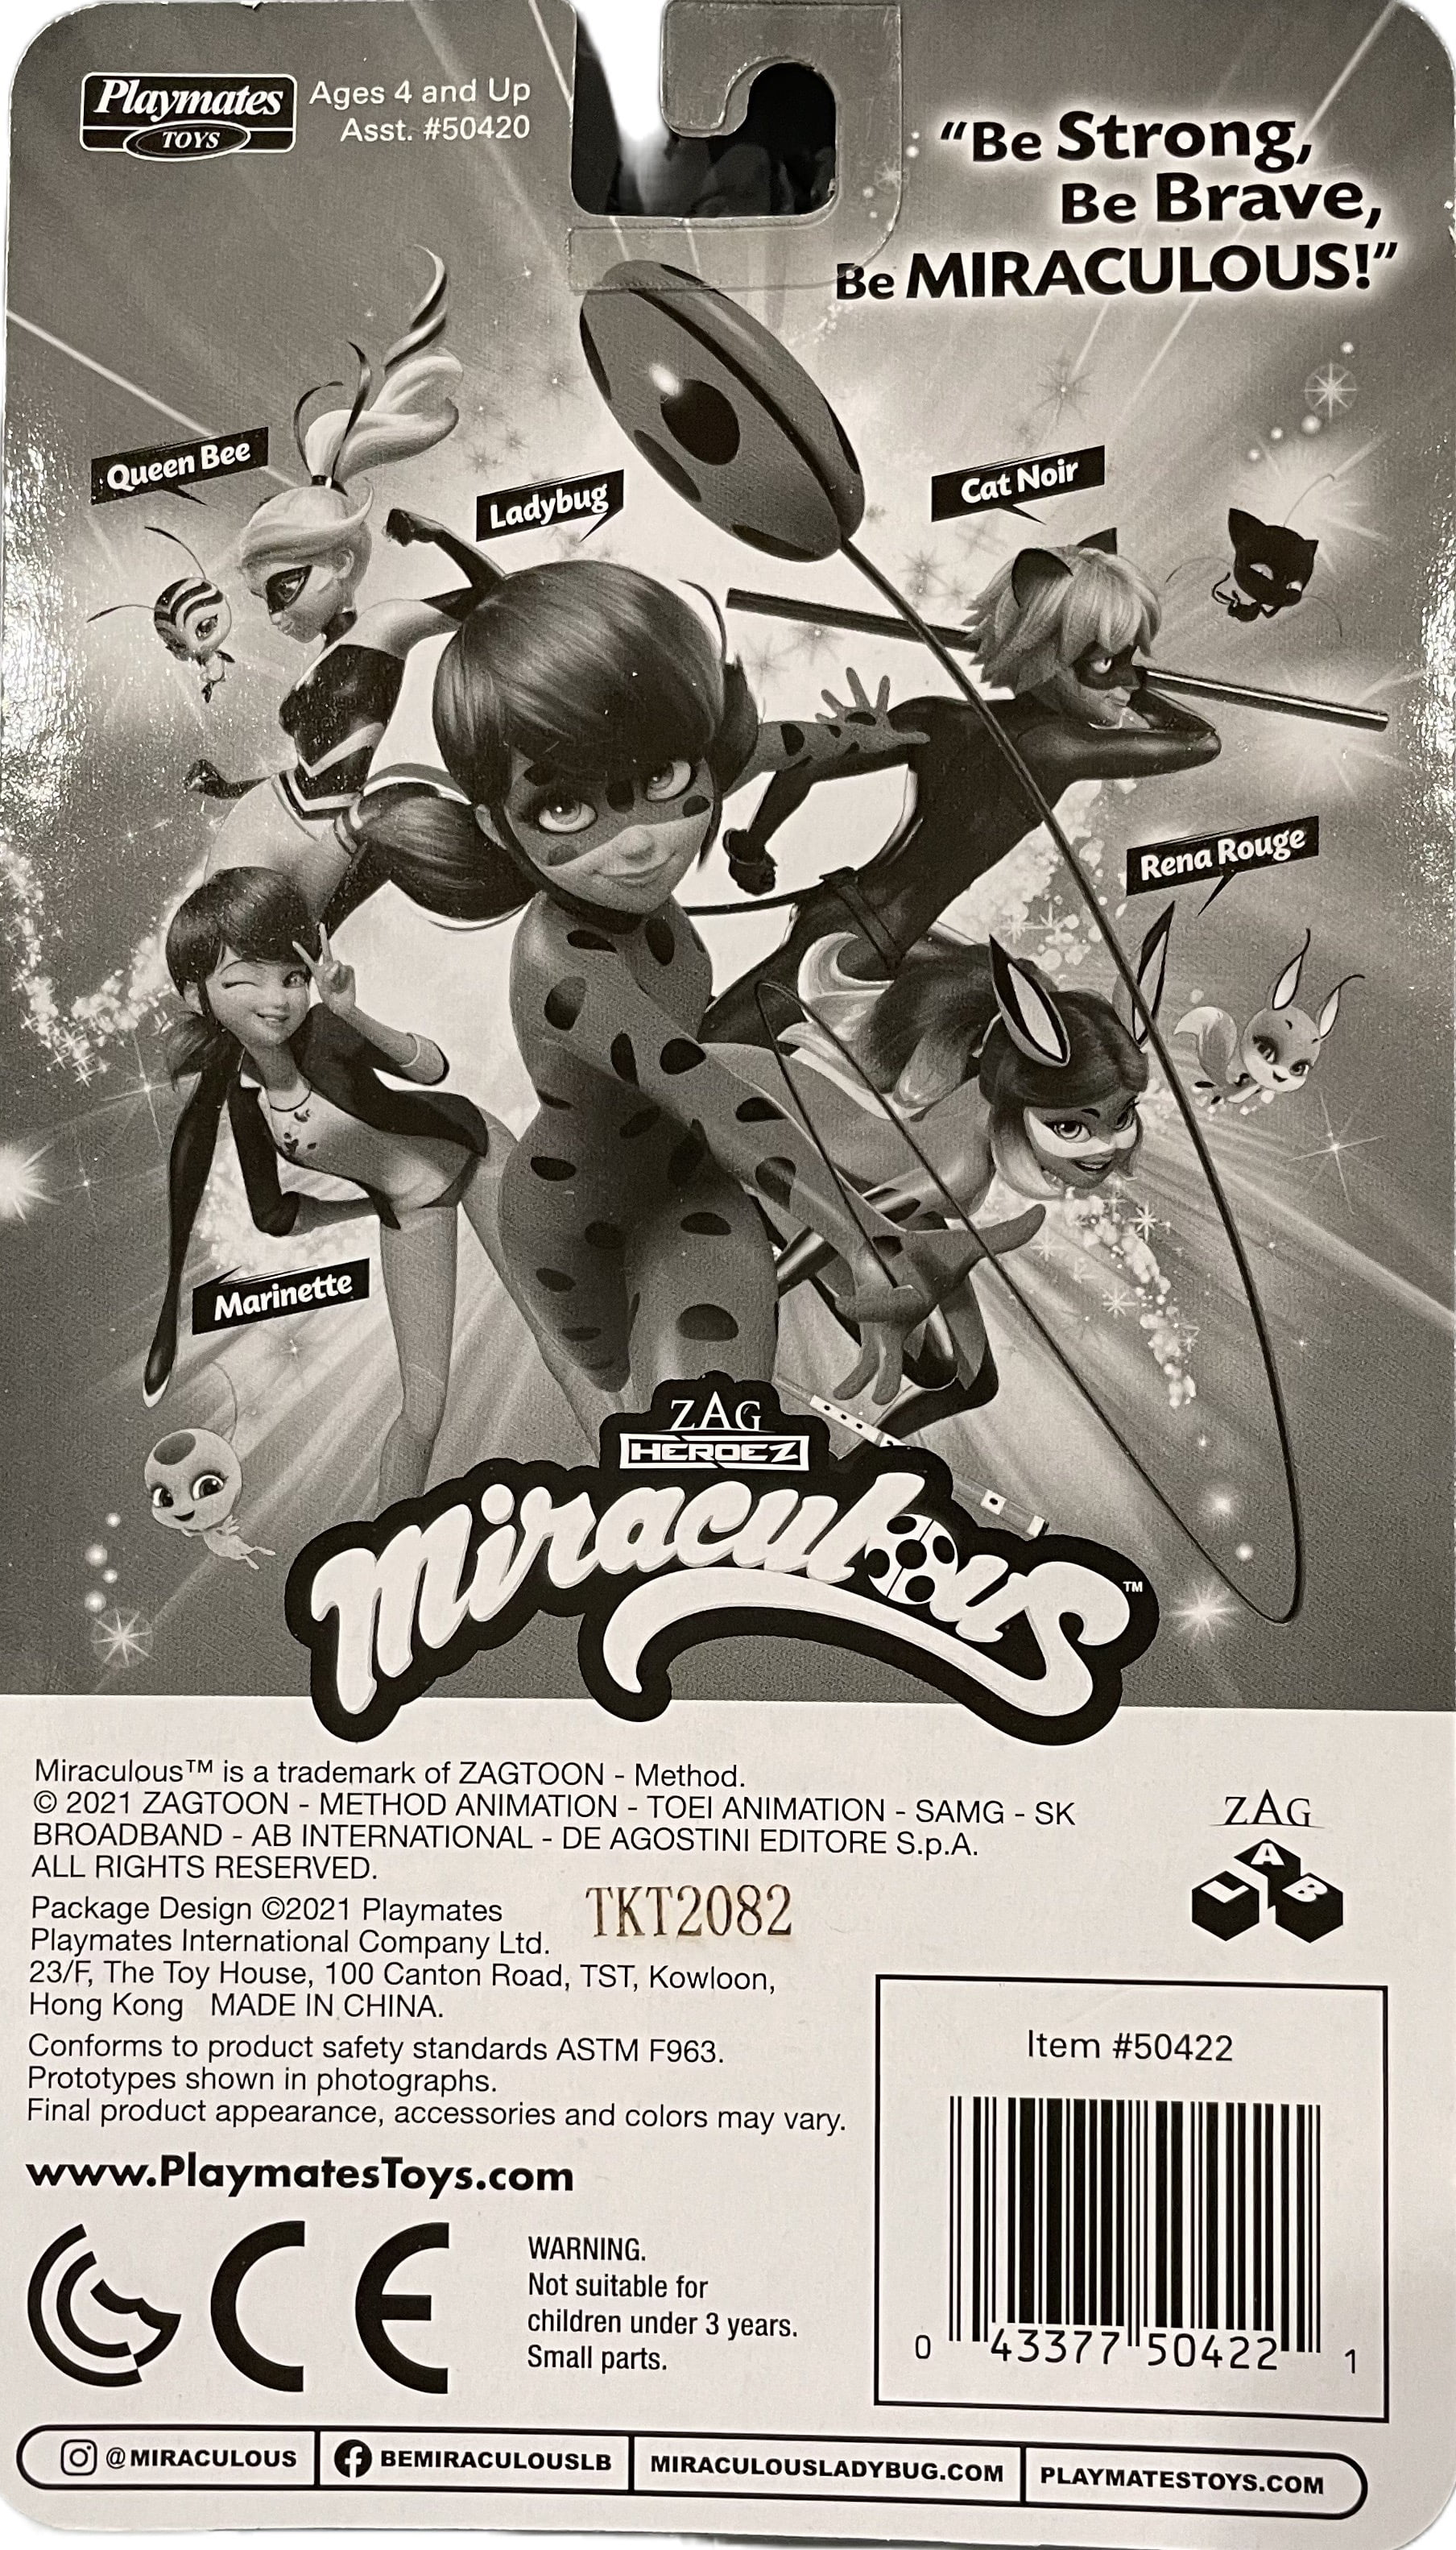 Miraculous: Cat Noir RealBig - Officially Licensed Zag Removable